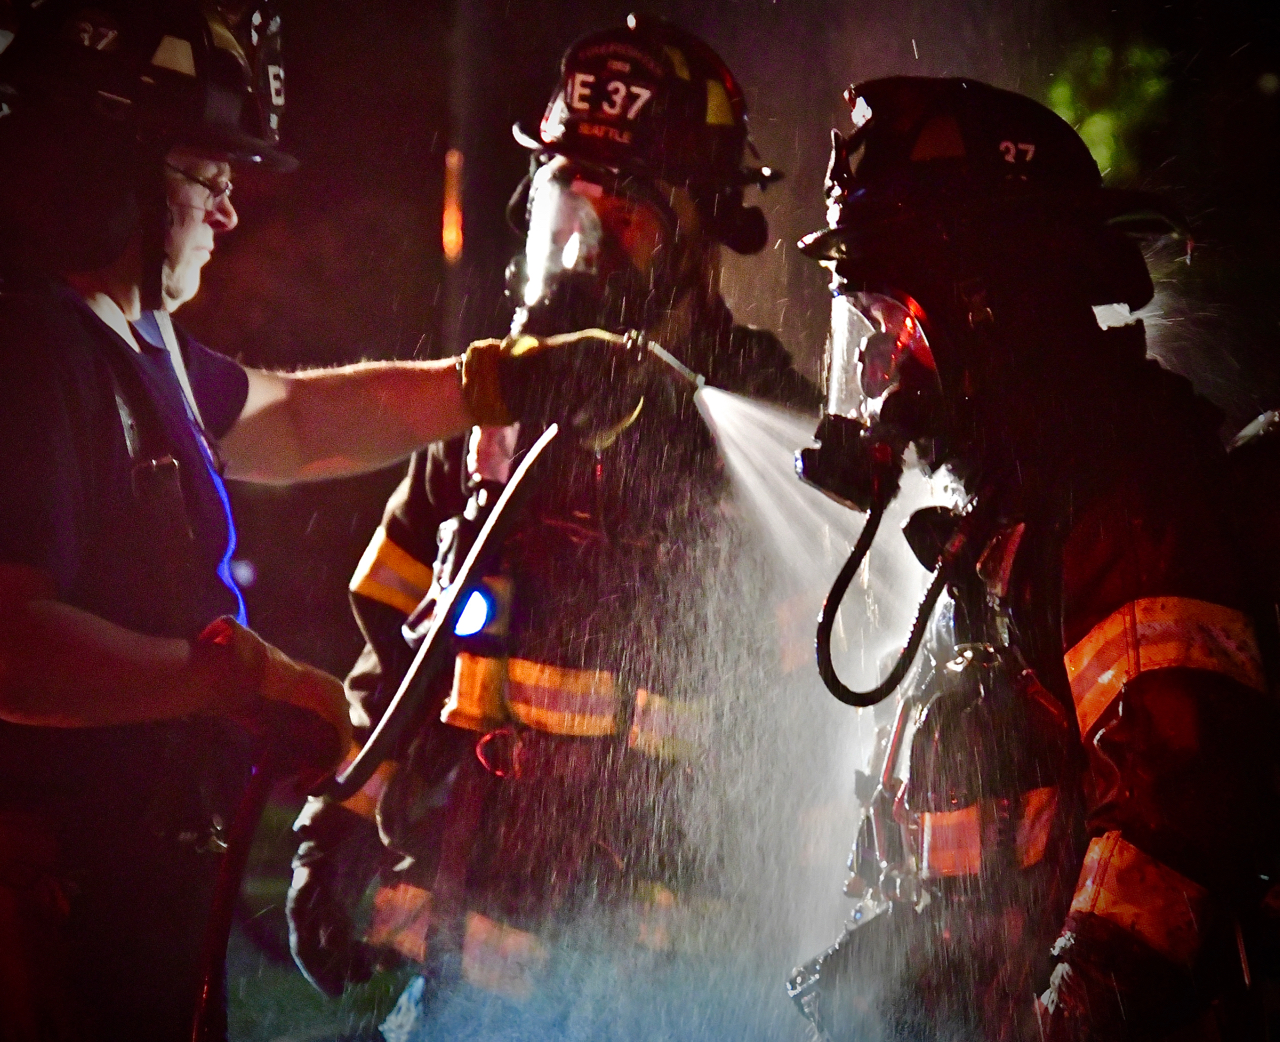 A firefighter gets the smoke and ash hosed off. Photo by Patrick Robinson